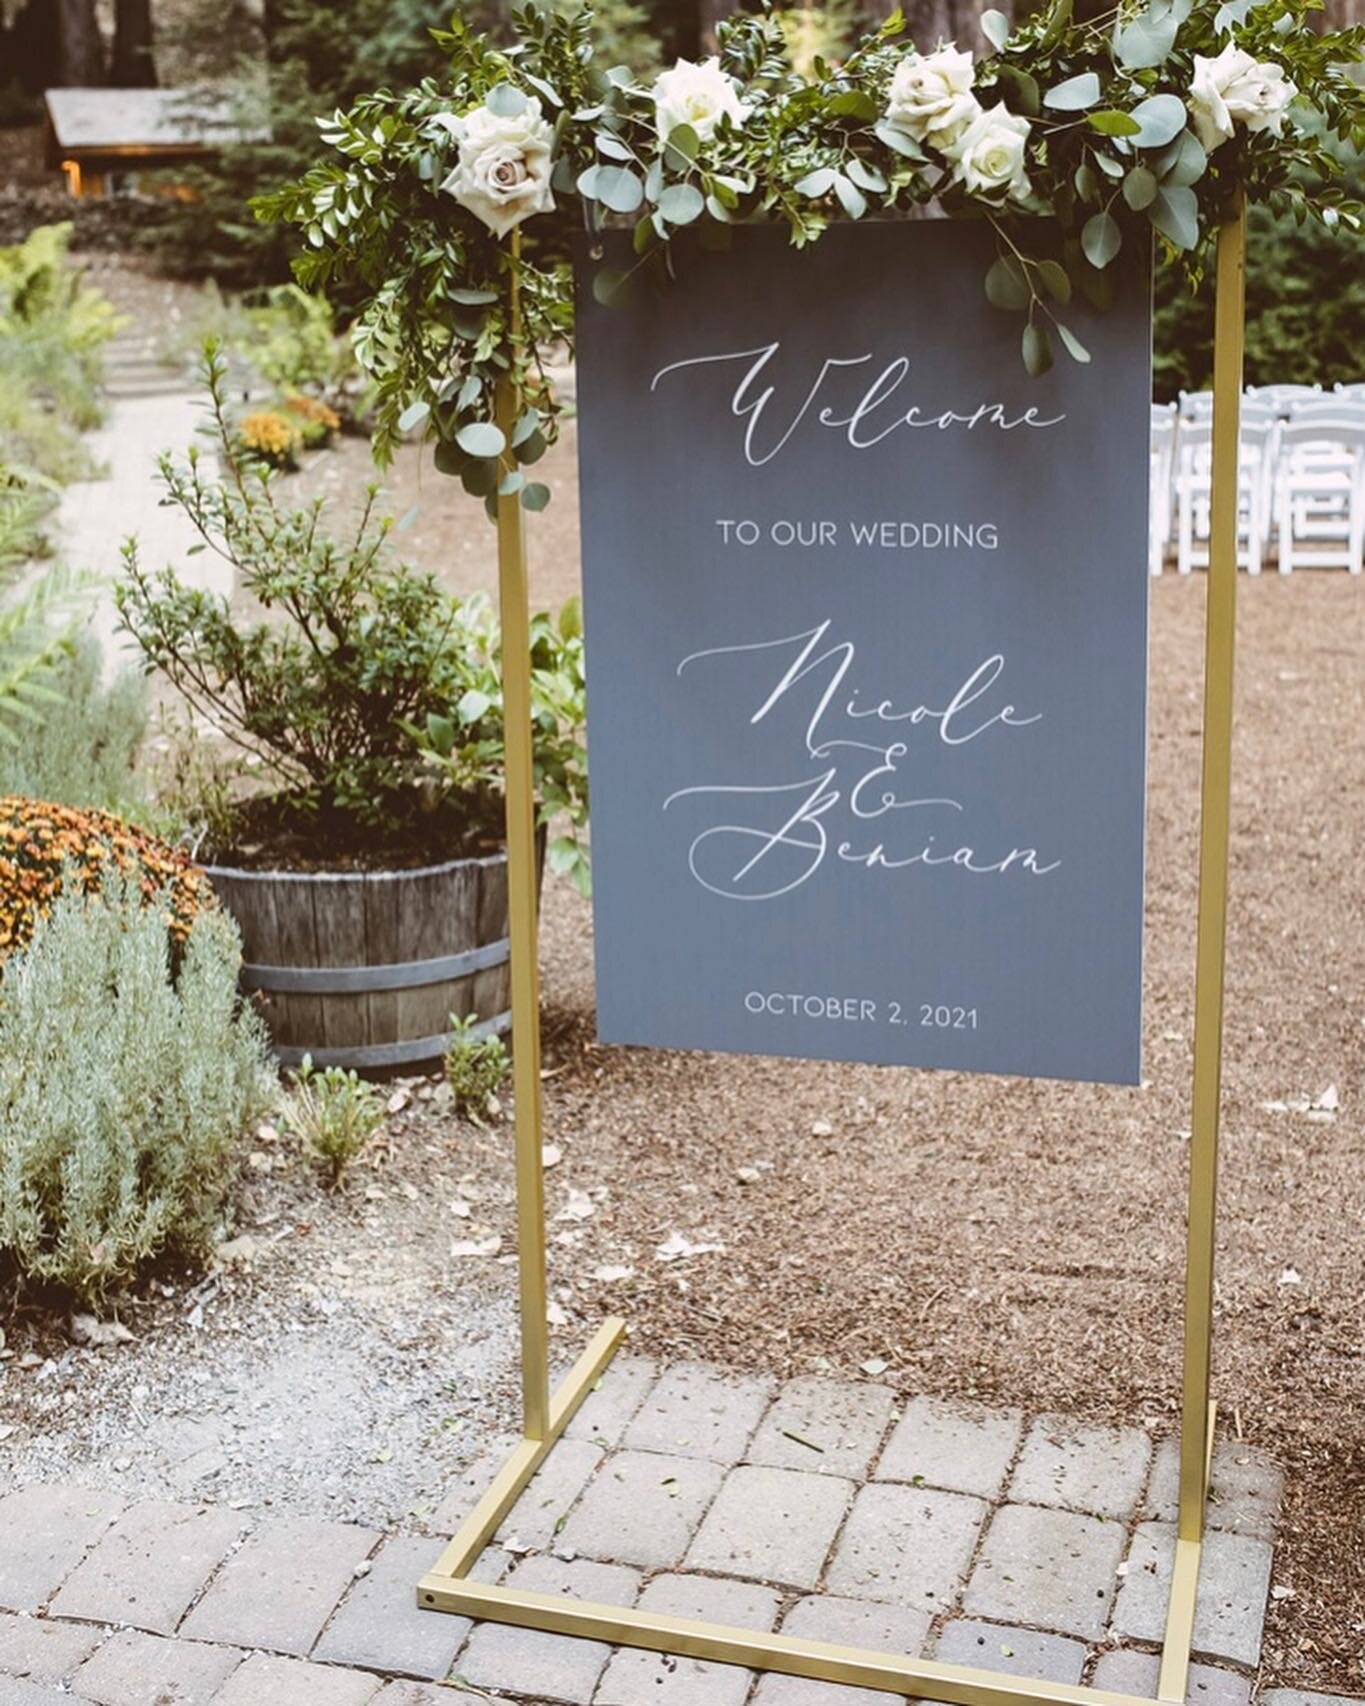 Loving the photos rolling in from last falls weddings 🥰 I love a traditional neutral classy navy aesthetic! With soft grays, simple modern design, what a beautiful day for a beautiful couple! 

Planning &amp; Design: @atlas_designstudio 
Florals: @s